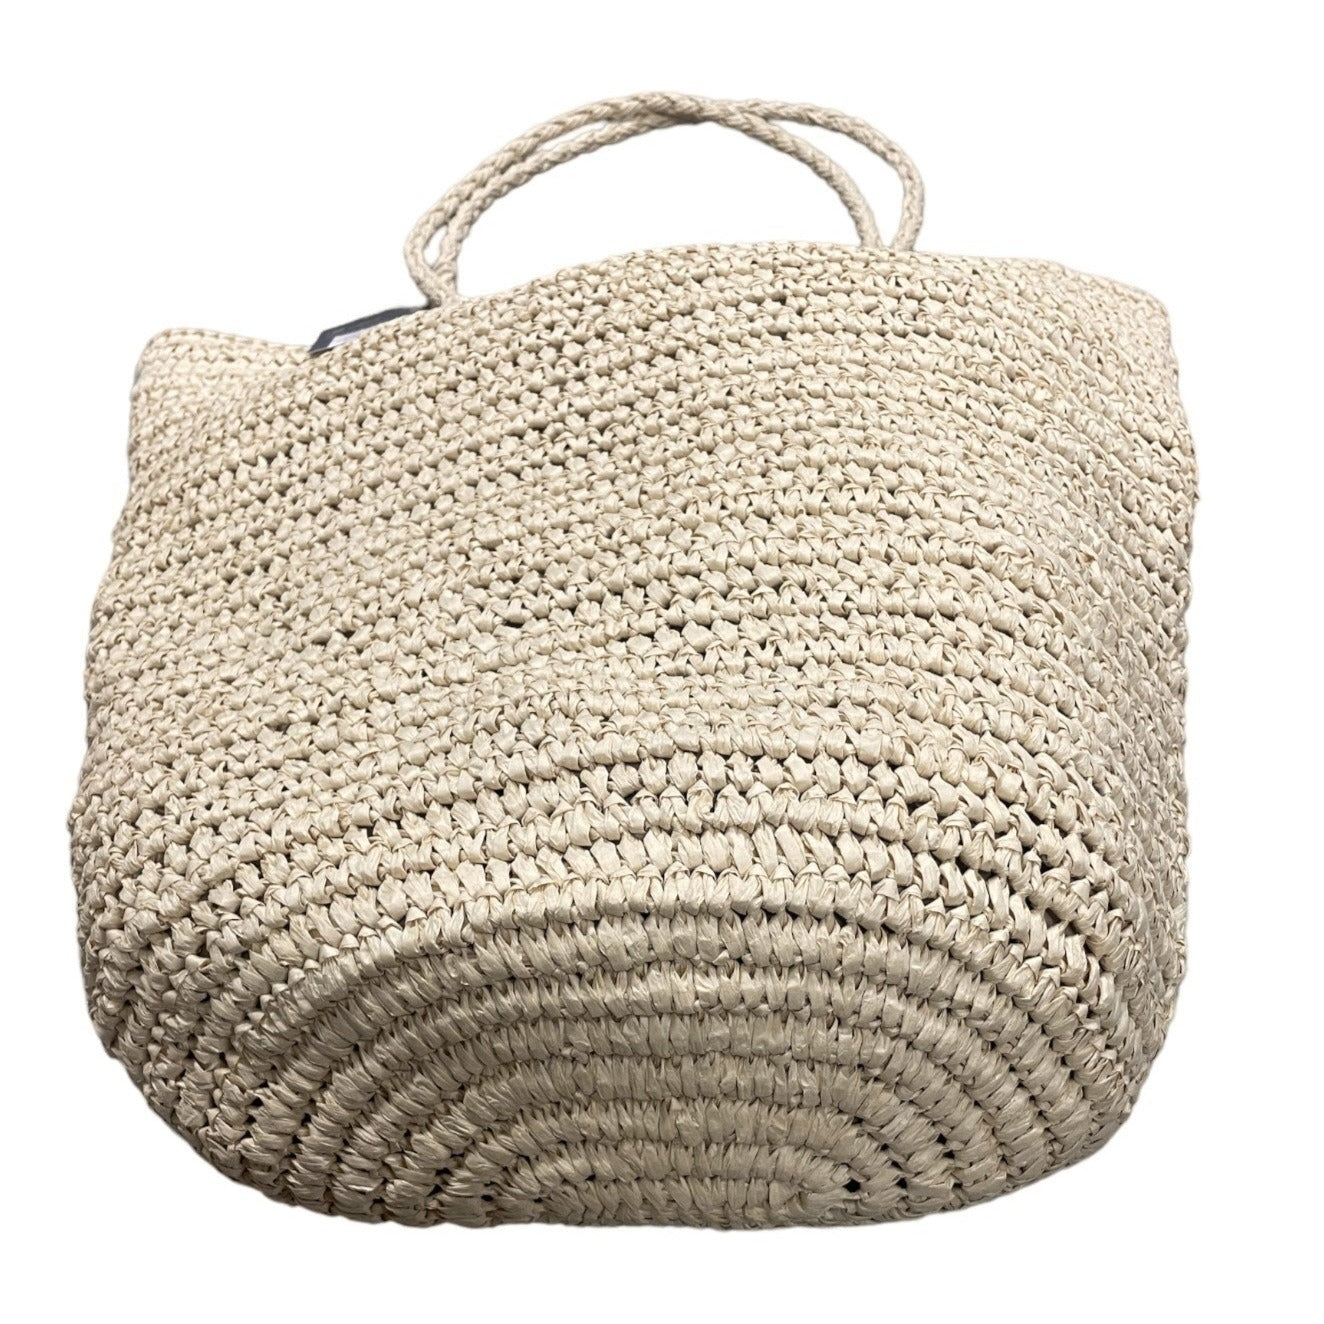 Universal Thread Paper Straw Beach Pool Double Strap Shoulder Bag, Natural